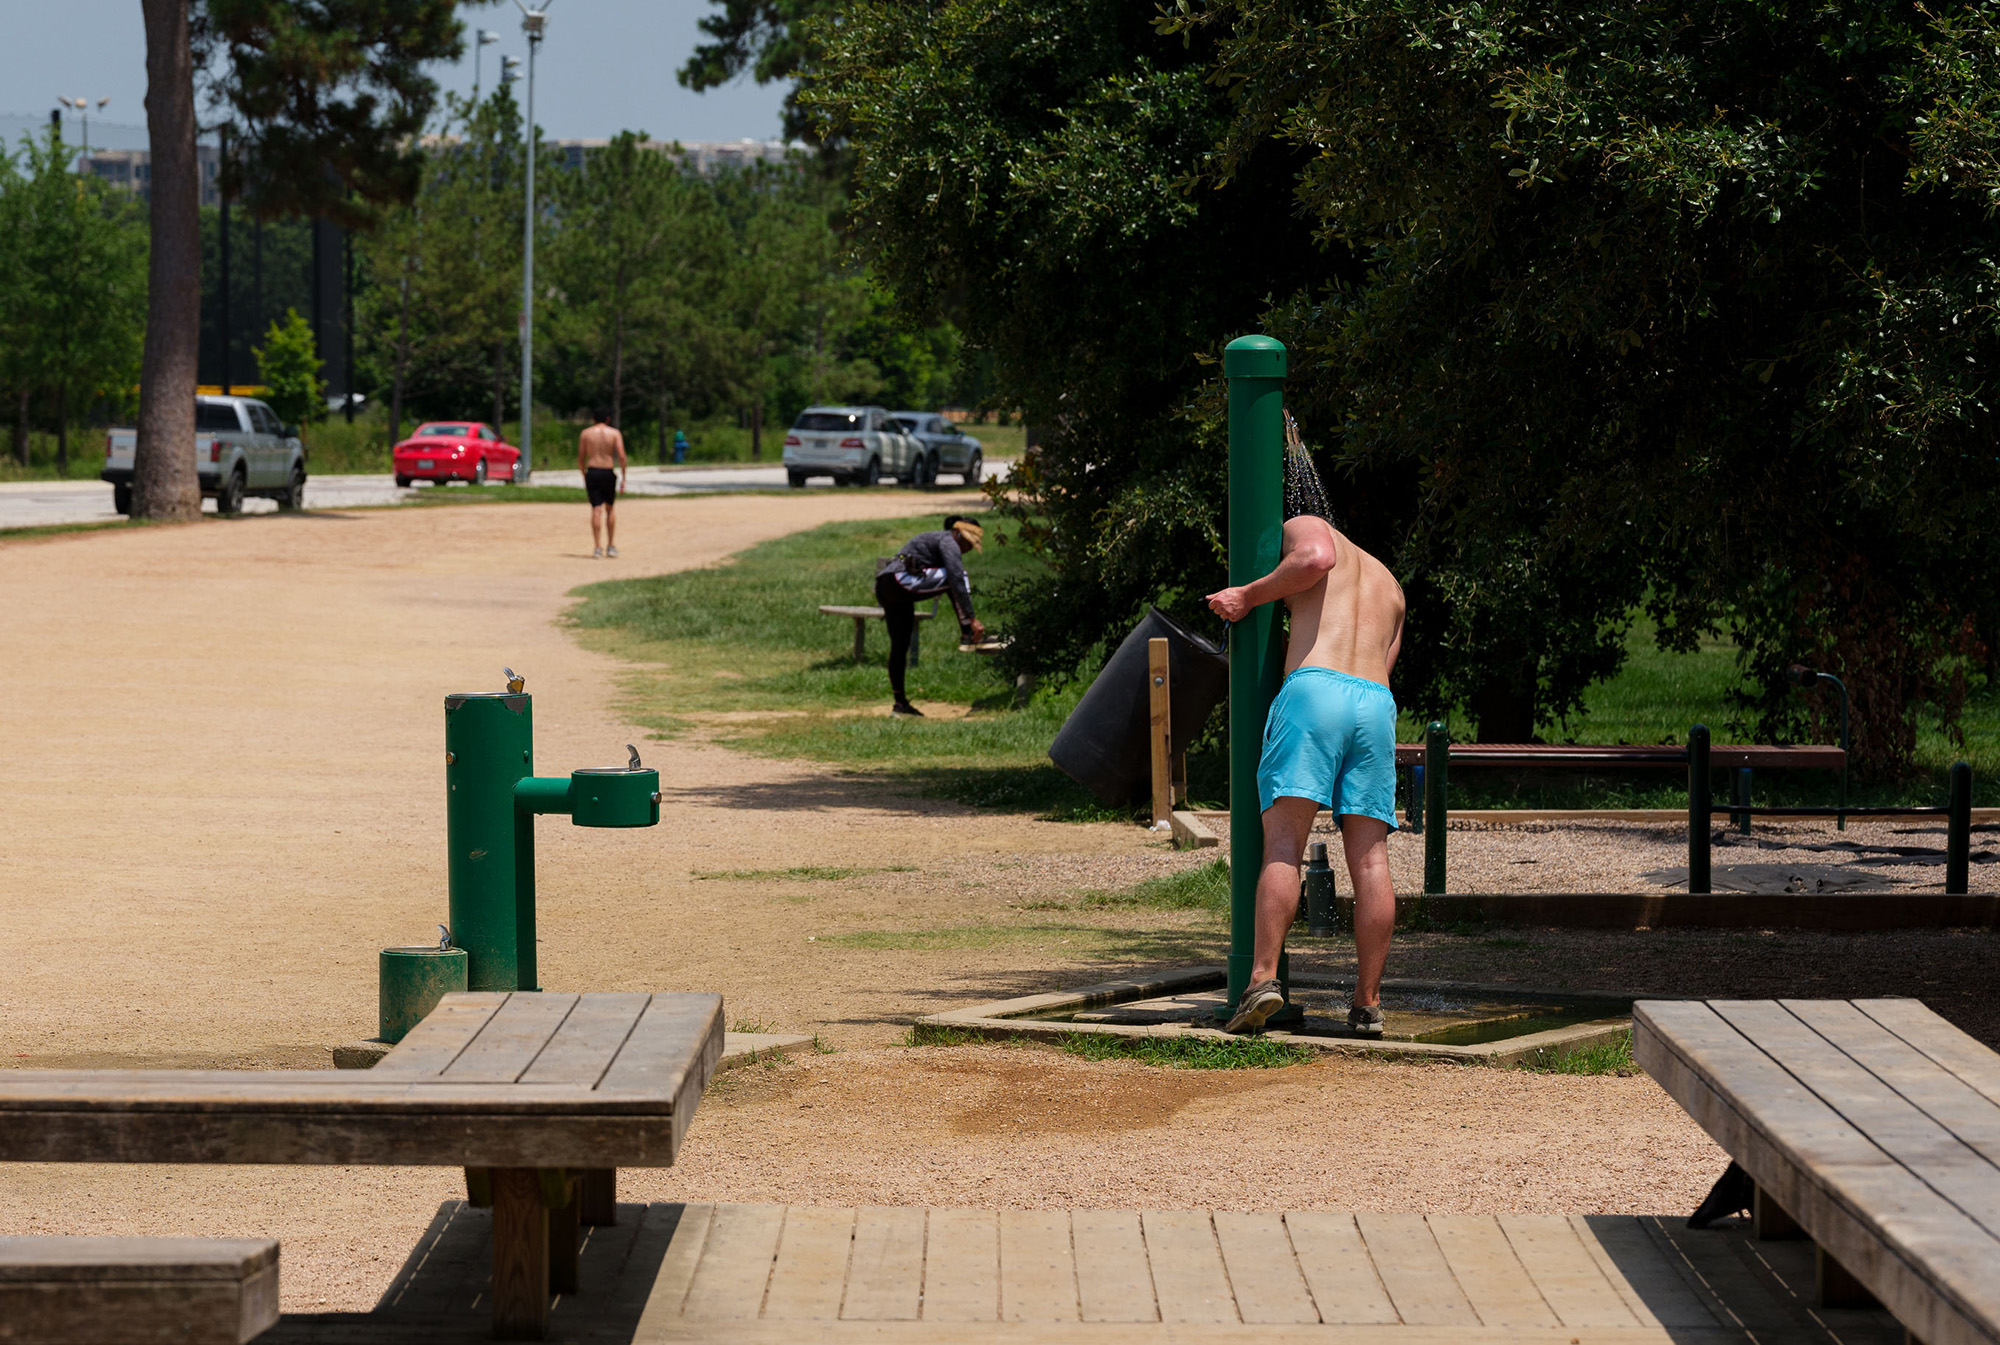 A runner cools off under&nbsp;an outdoor shower at a park in Houston, Texas, on&nbsp;June 15.